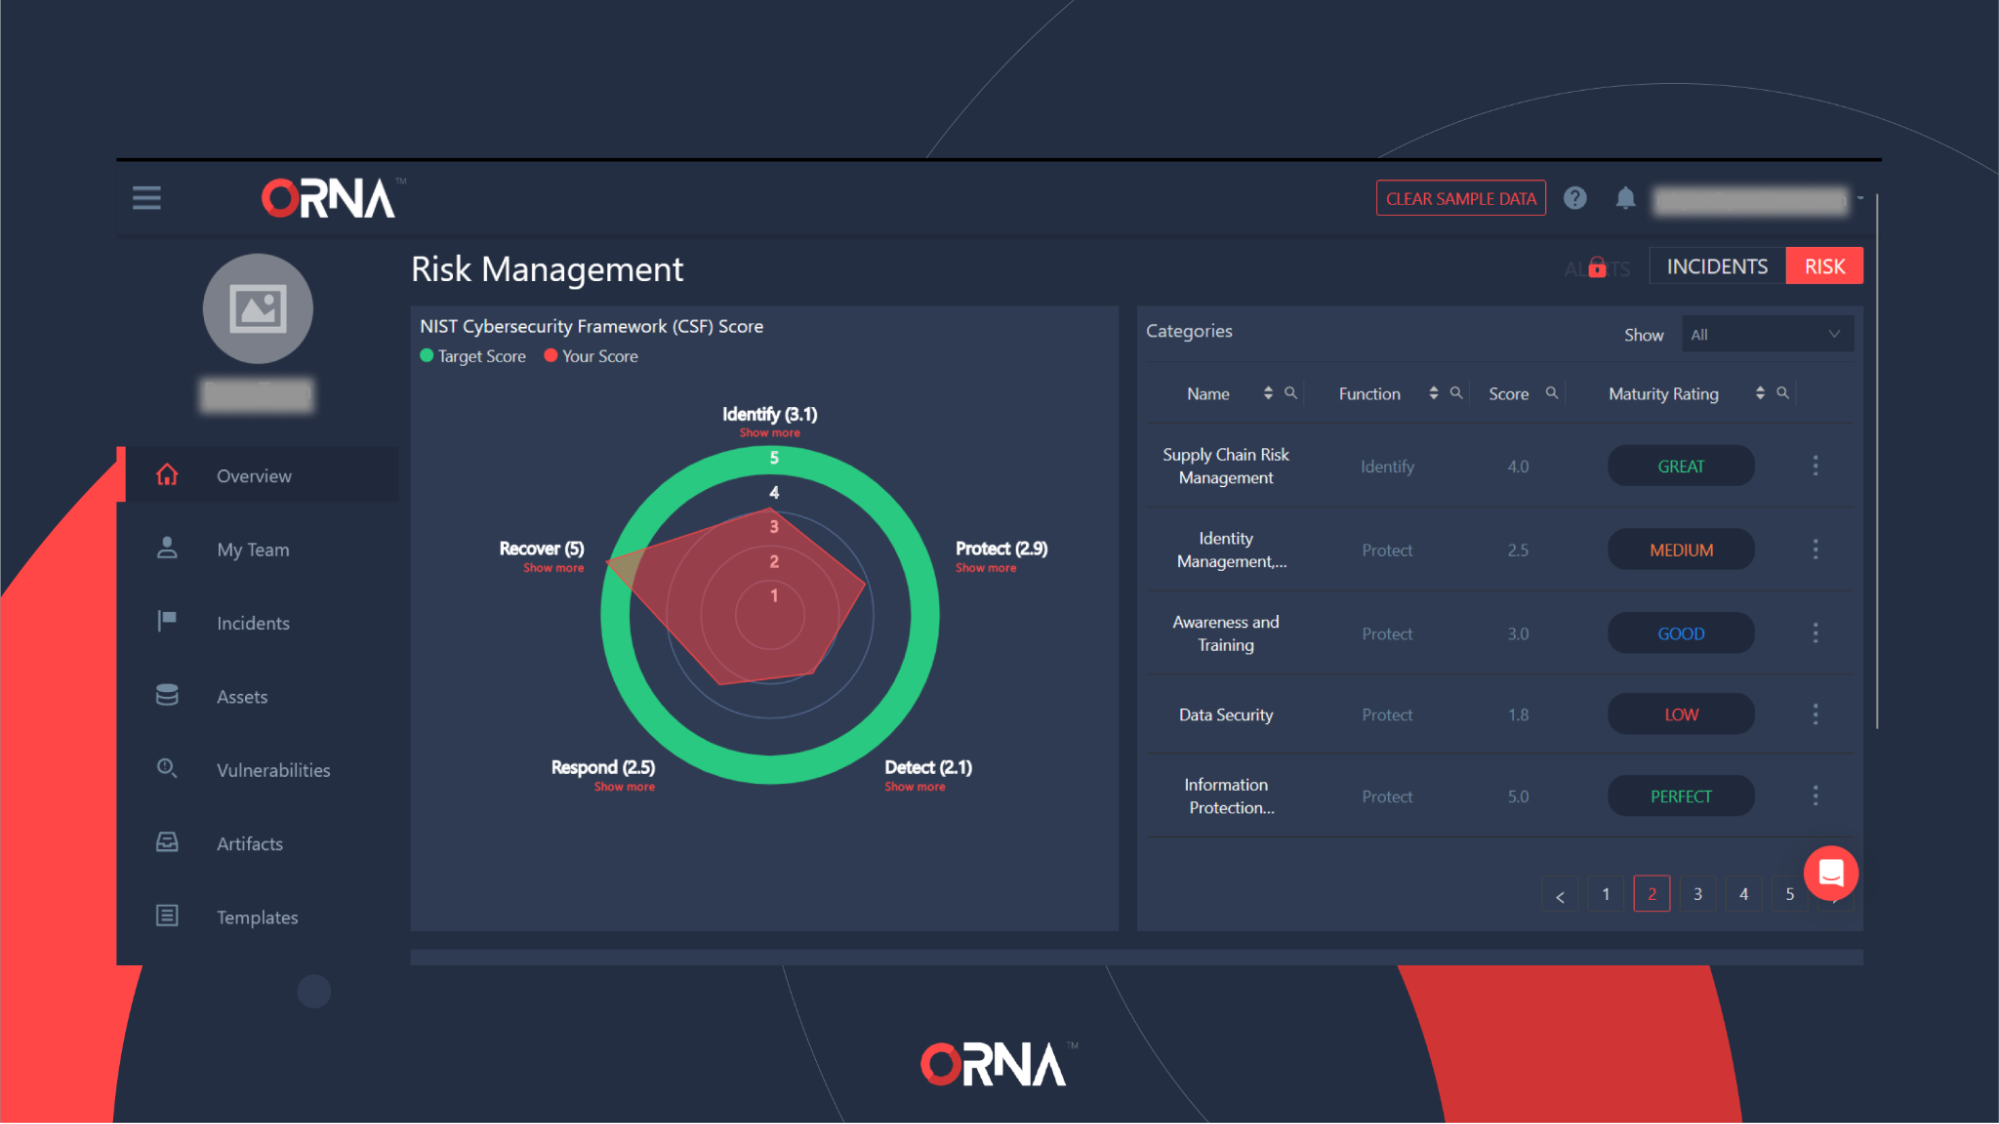 ORNA's Risk Management dashboard (partial)